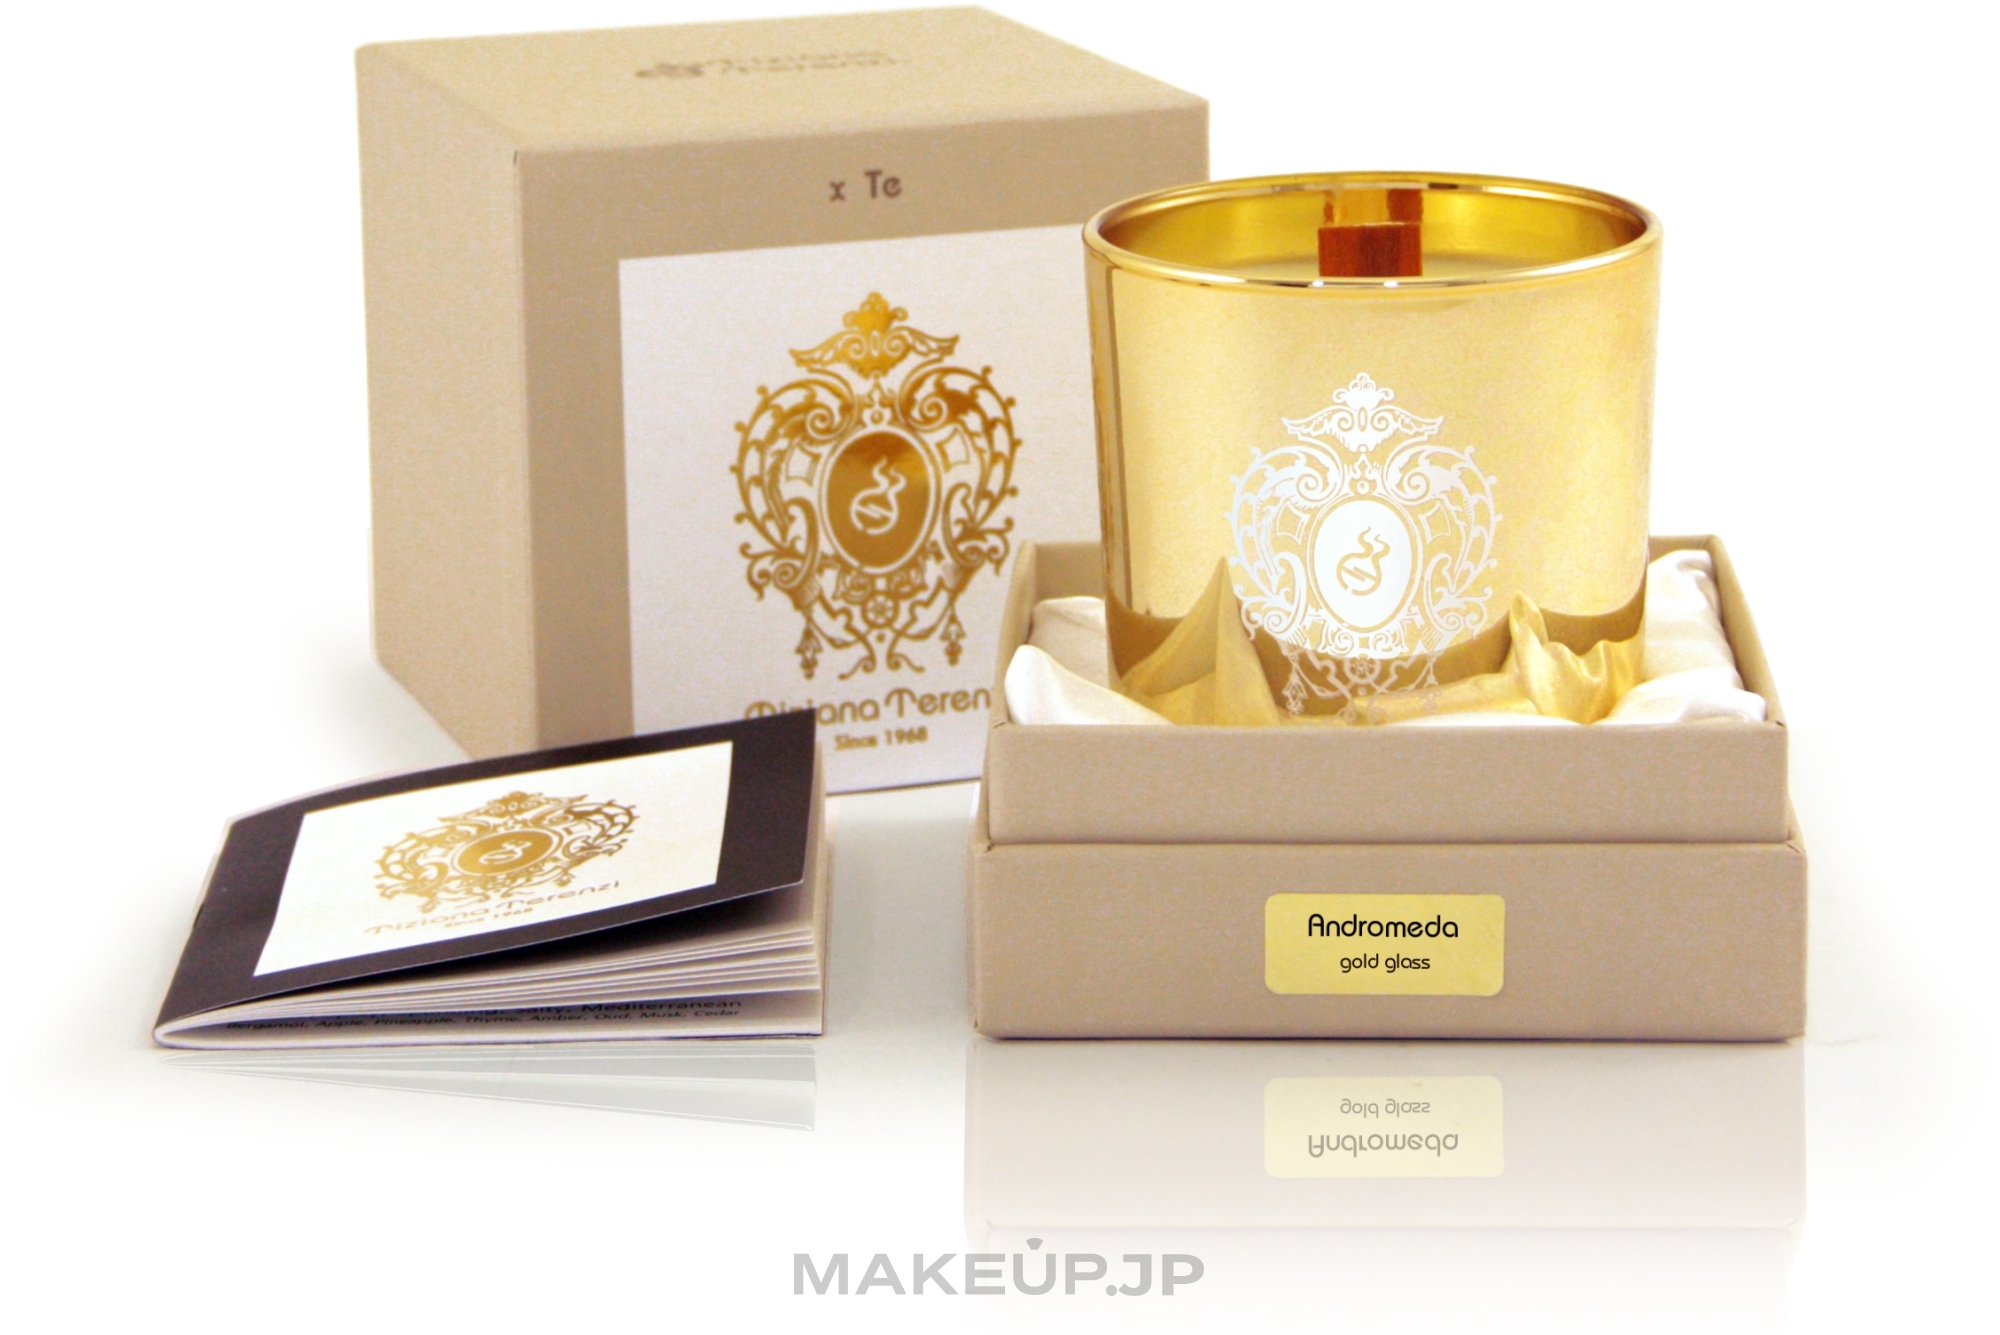 Tiziana Terenzi Andromeda Scented Candle Gold Glass - Scented Candle — photo 170 g